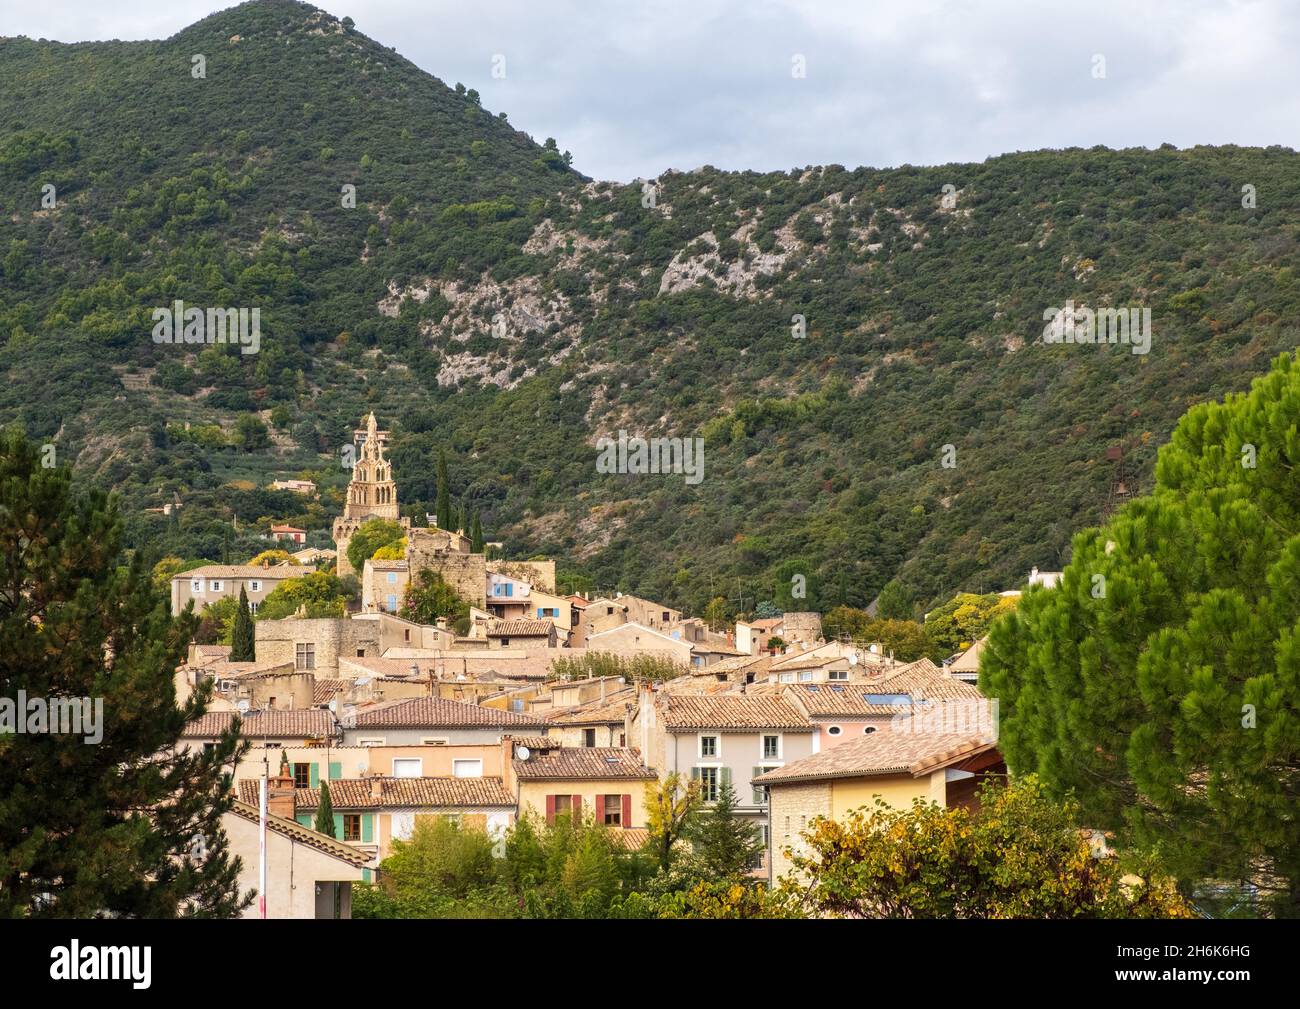 View of the old town of Nyons, Quartier des Forts, Drome, France with Tour Randonne at its apex. Stock Photo